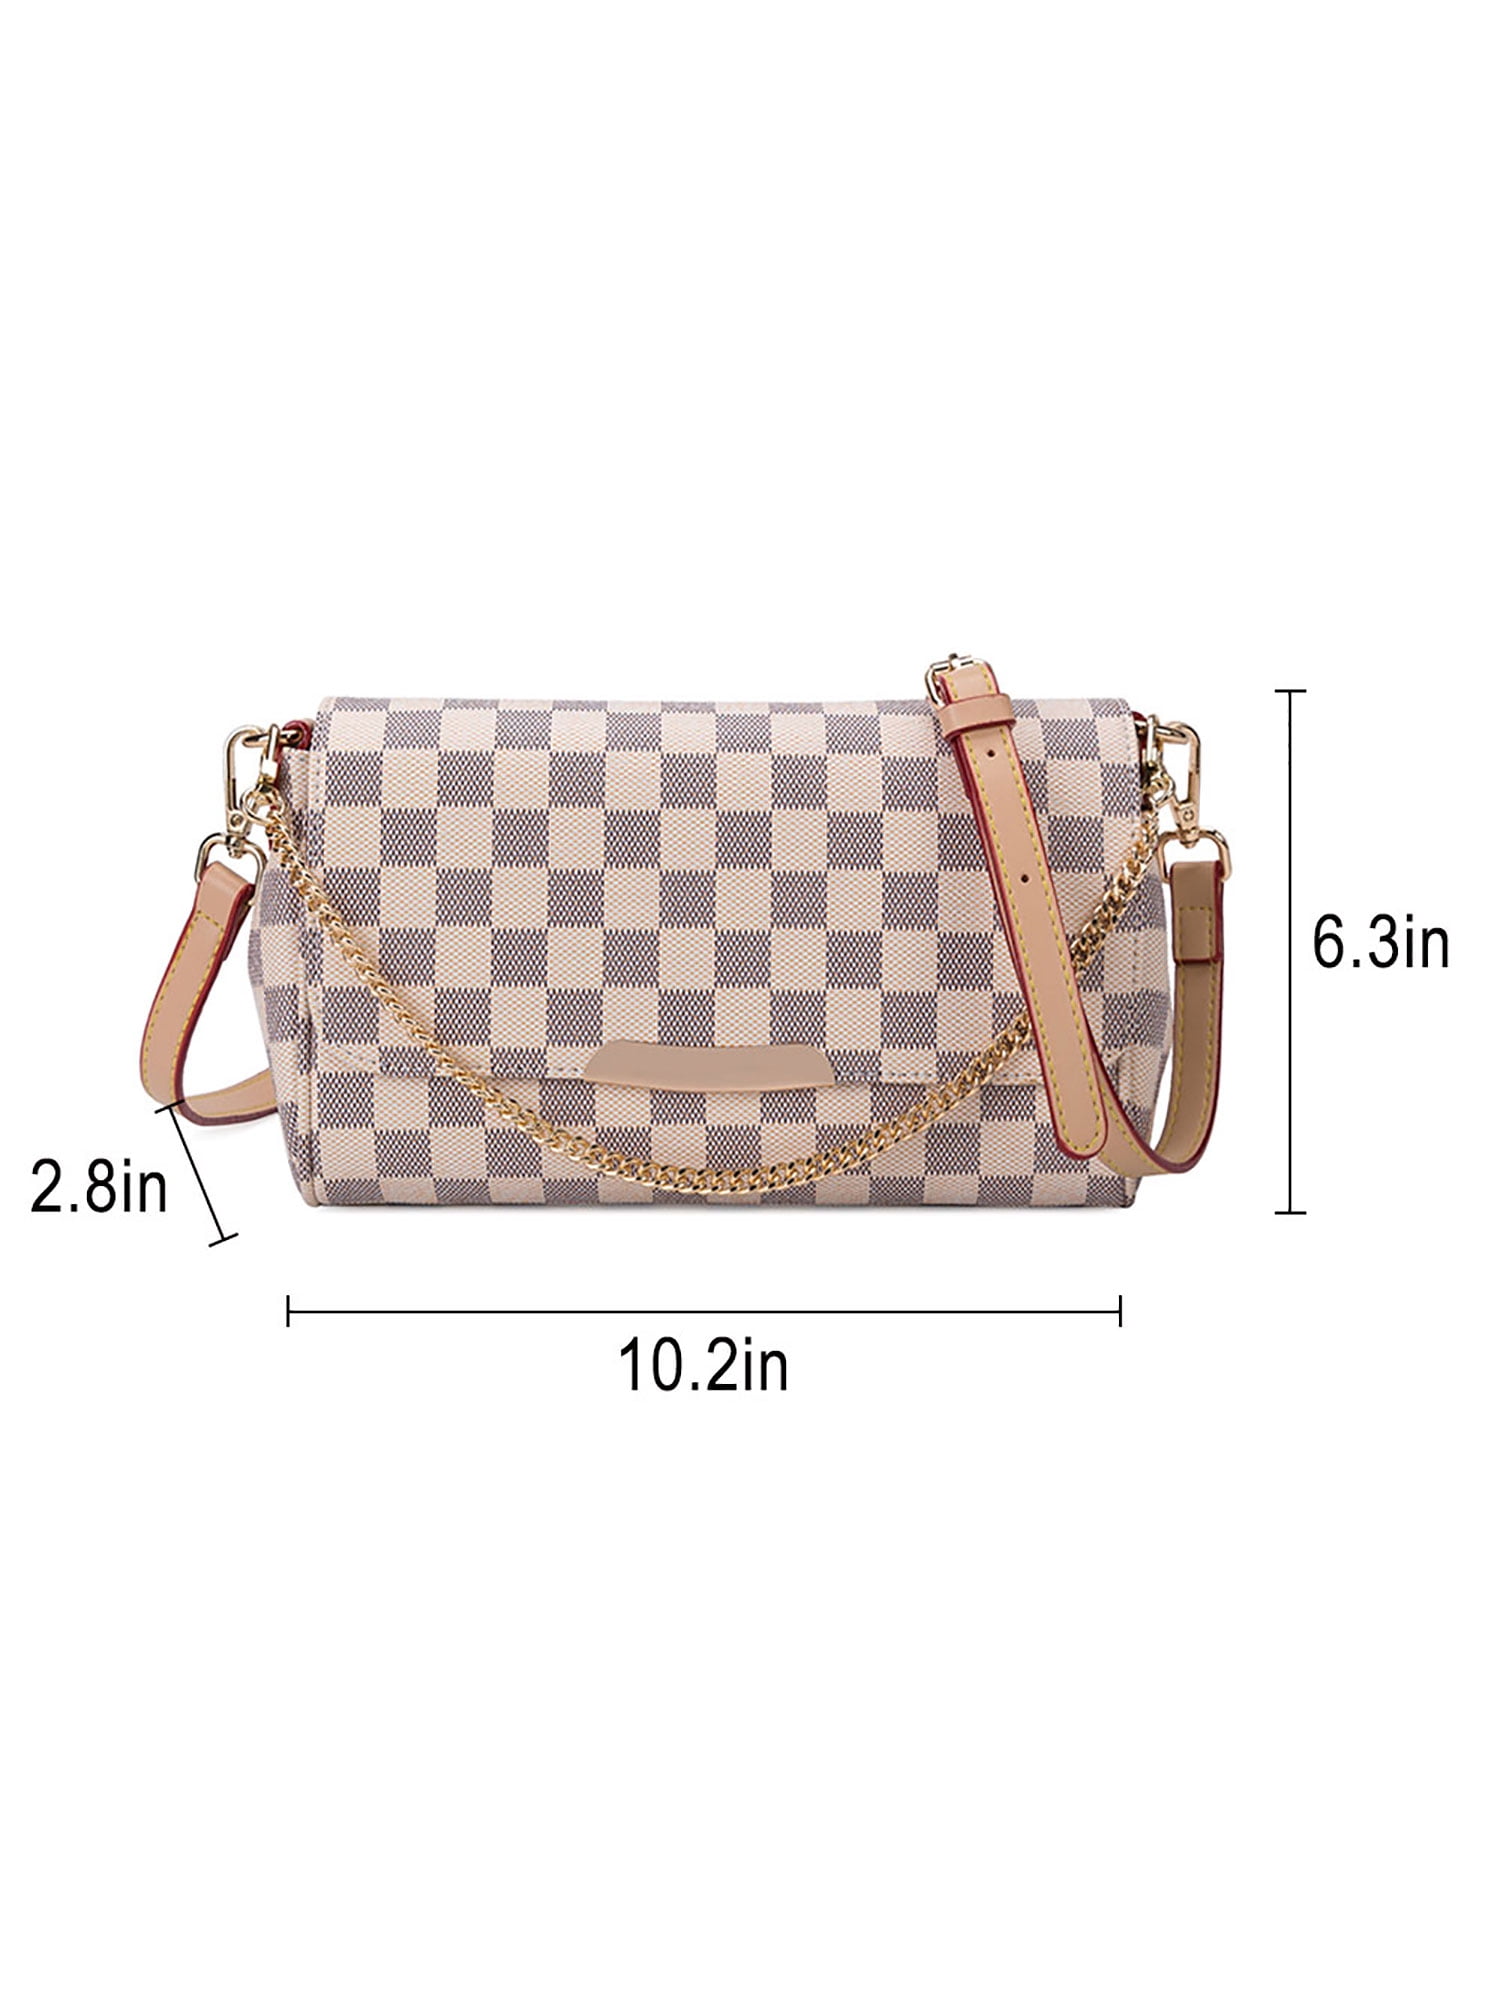 Sexy Dance Women Fashion Backpack 2 in 1 Checkered Shoulders Bag Work Tote  Handbag Satchel School Travel Daypack with Wallet Pouch 